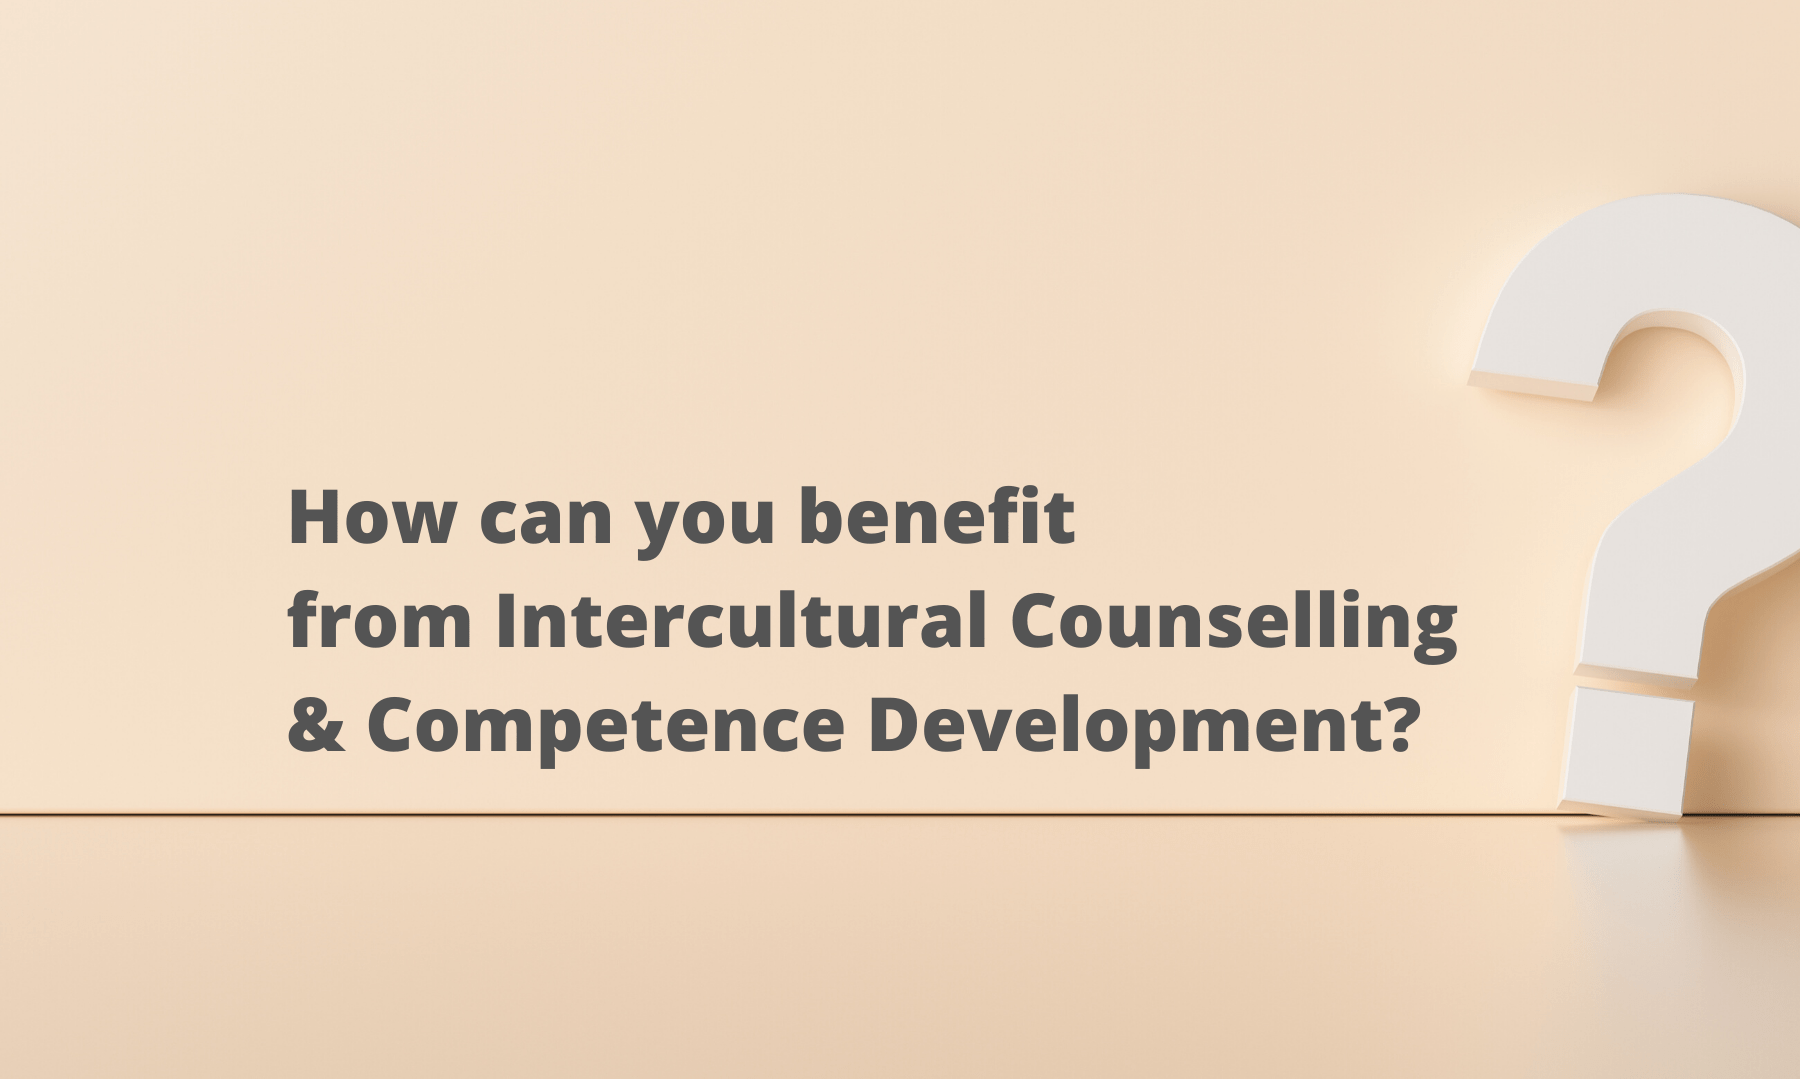 Why Intercultural Counselling and Competence Development?